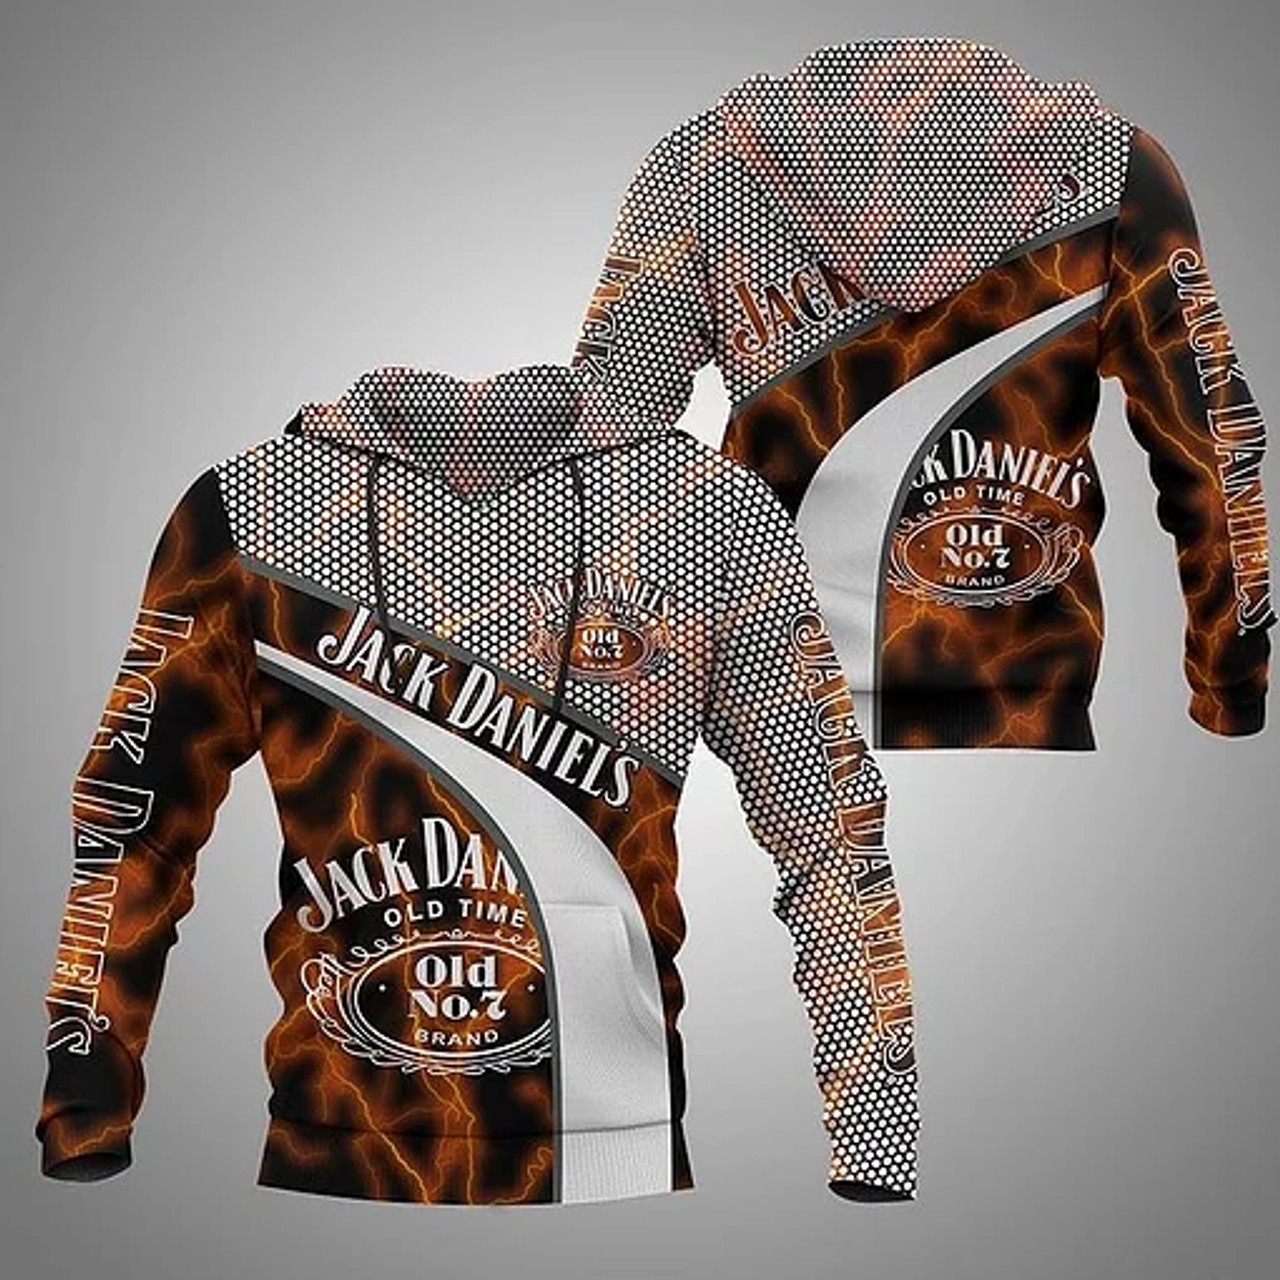 **(OFFICIAL-JACK-DANIELS-PULLOVER-HOODIES & CLASSIC-JACK-DANIELS-FIREY-CUSTOM-DESIGN/ALL-IN-THE-CLASSIC-JACK-DANIELS-OLD-TIME-NO.7 & CLASSIC-OFFICIAL-JACK-DANIELS-LOGOS/NICE-CUSTOM-3D-GRAPHIC-PRINTED-DOUBLE-SIDED-ALL-OVER-DESIGN/WARM-PREMIUM-TRENDY-JACK-DANIELS-PULLOVER-HOODIES)**